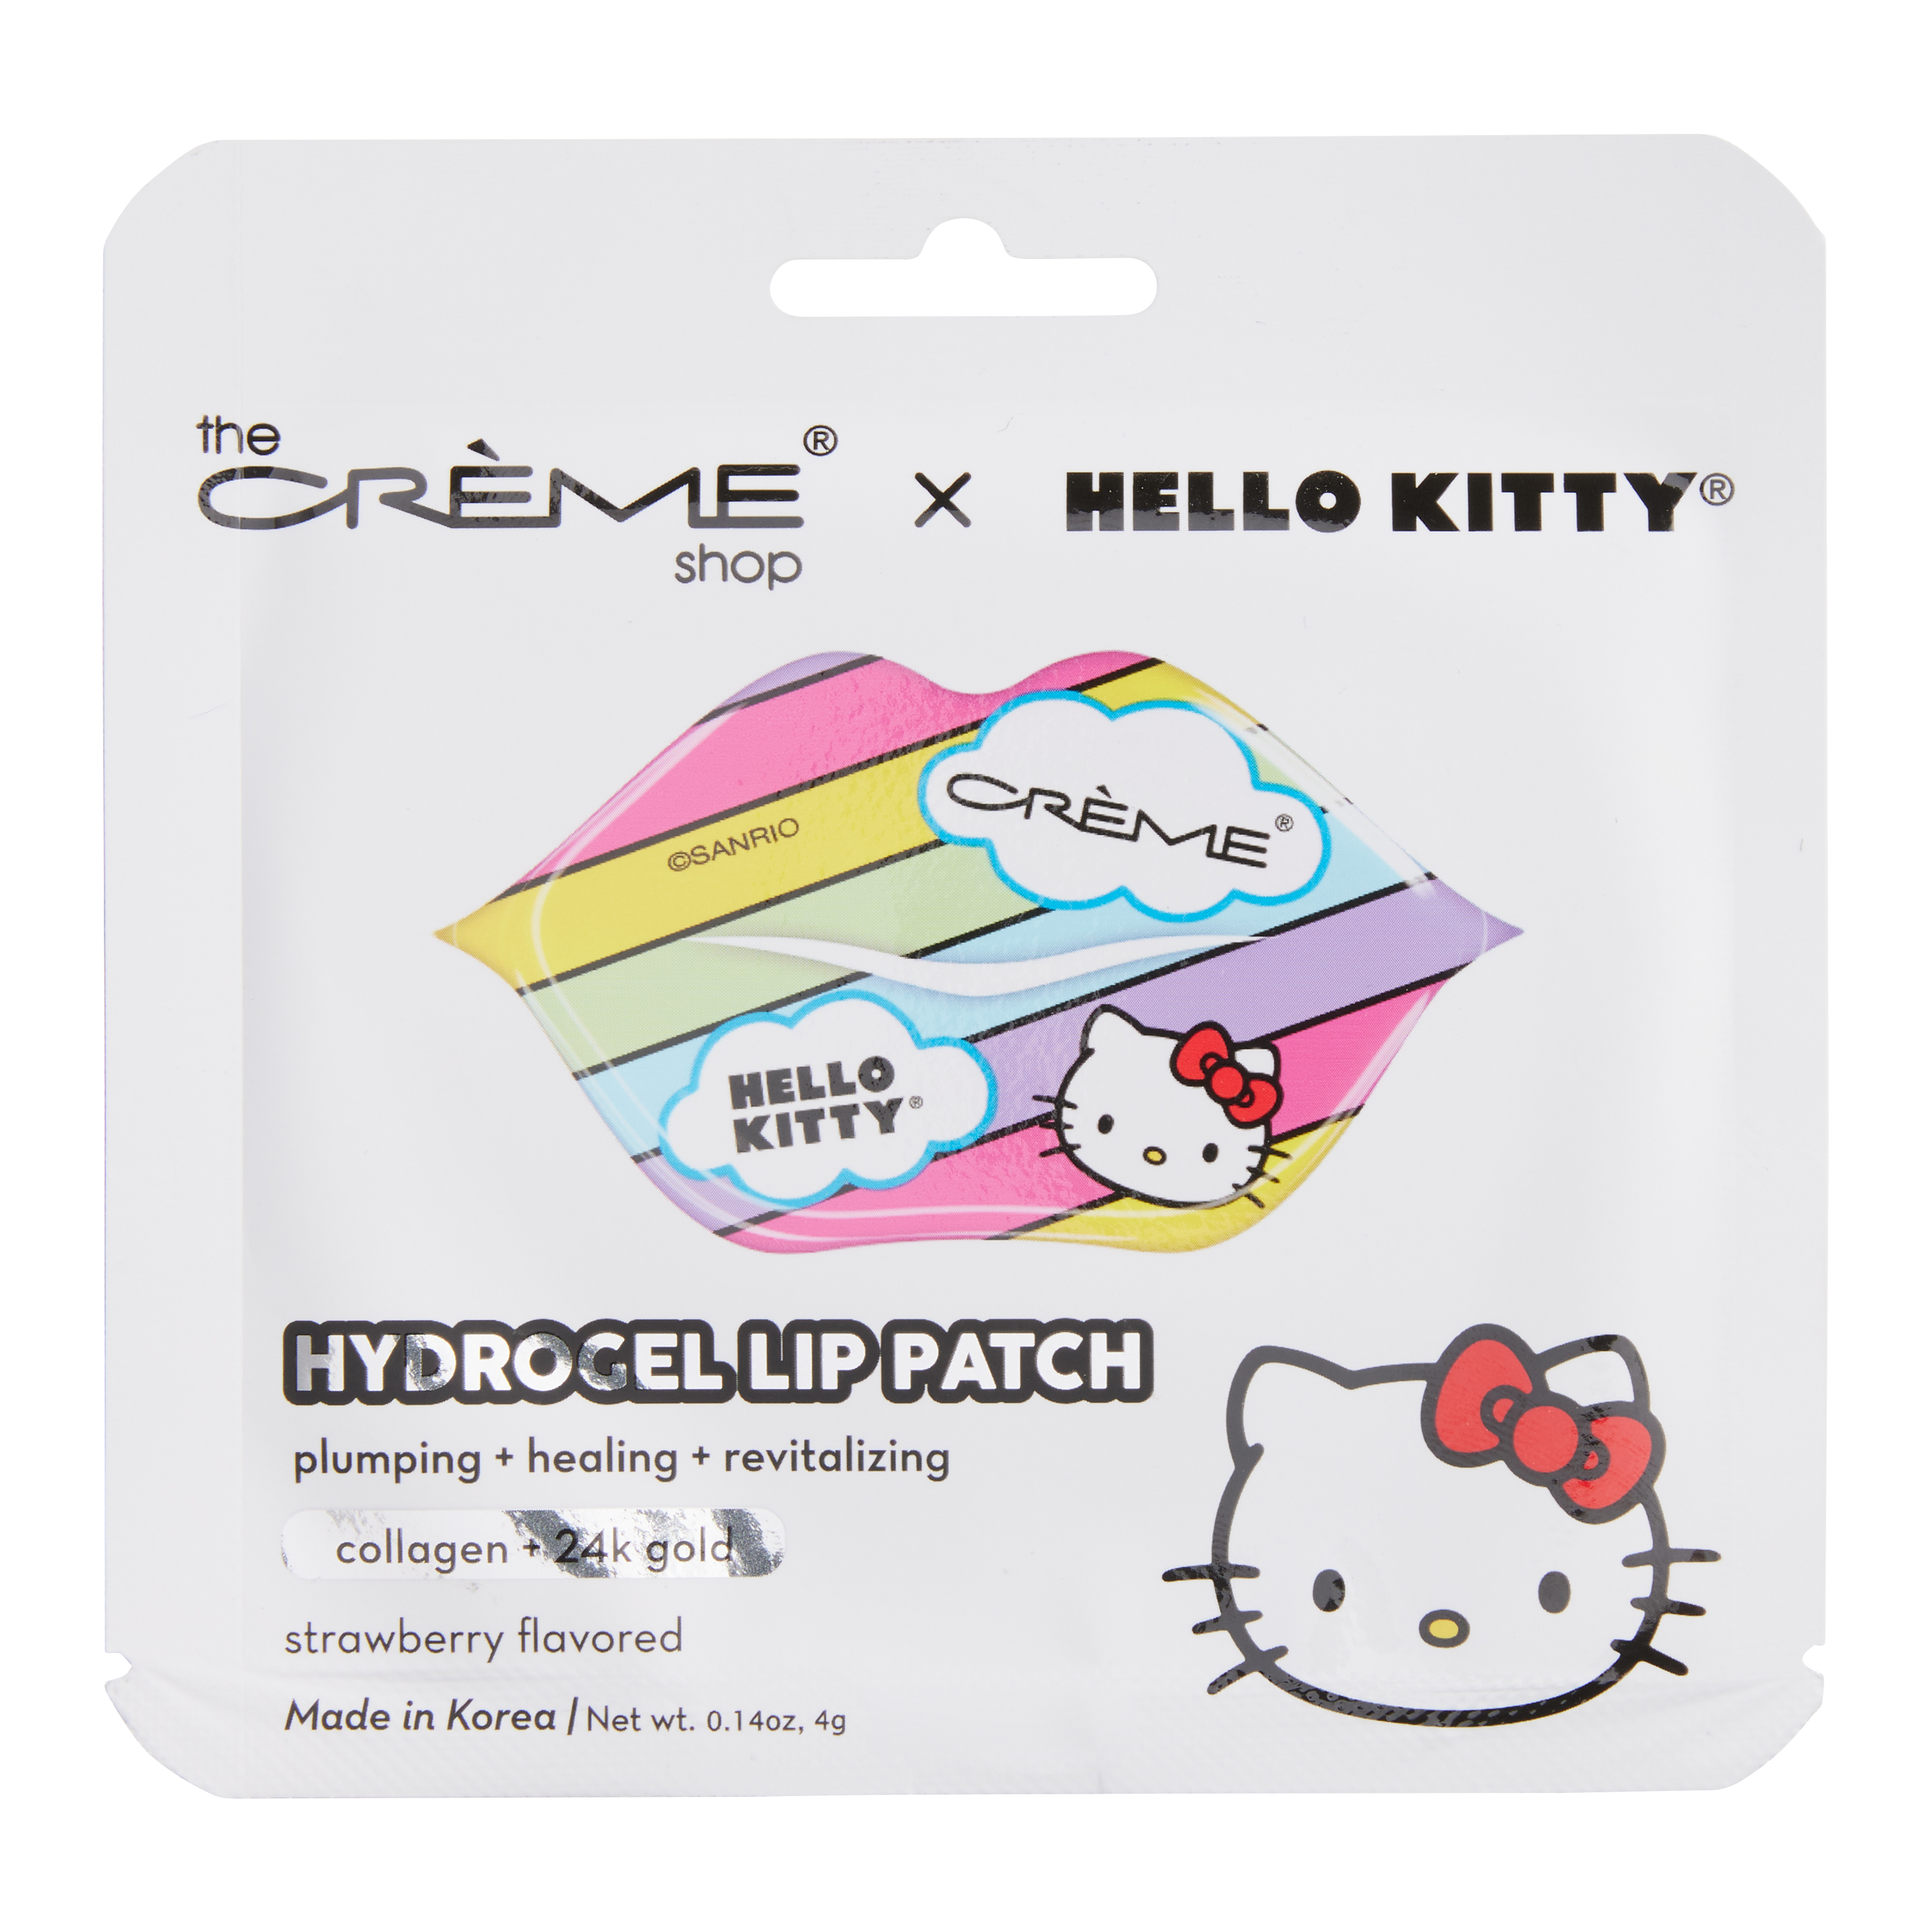 How to Use Sanrio Hello Kitty Iron On Patch BC13